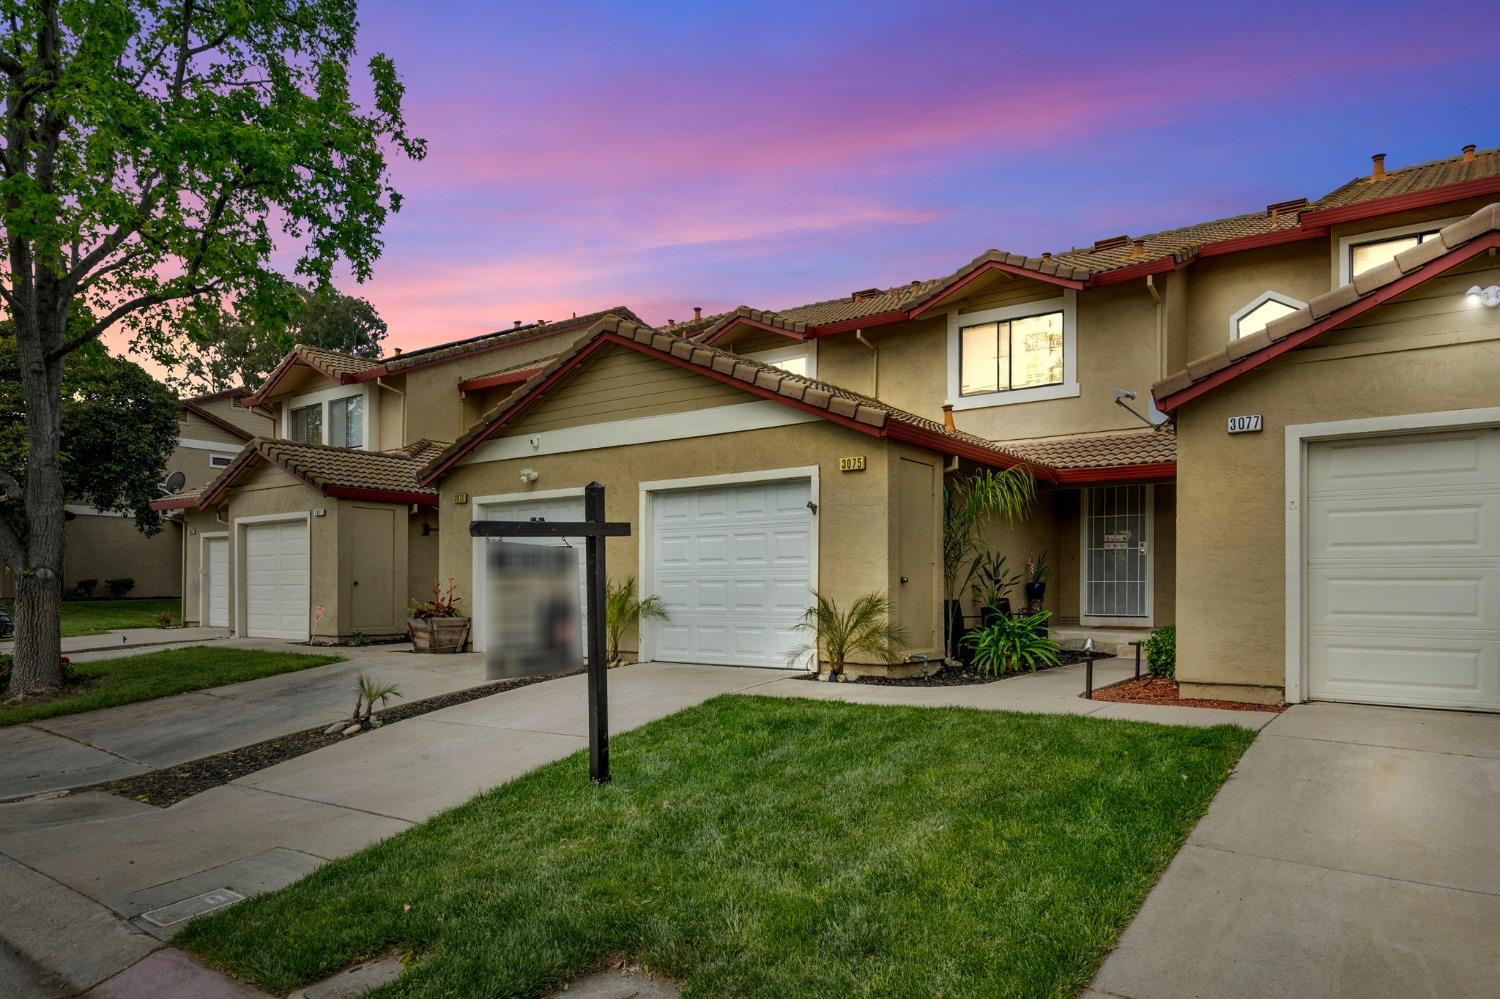 Photo of 3075 Peppermill Cir in Pittsburg, CA